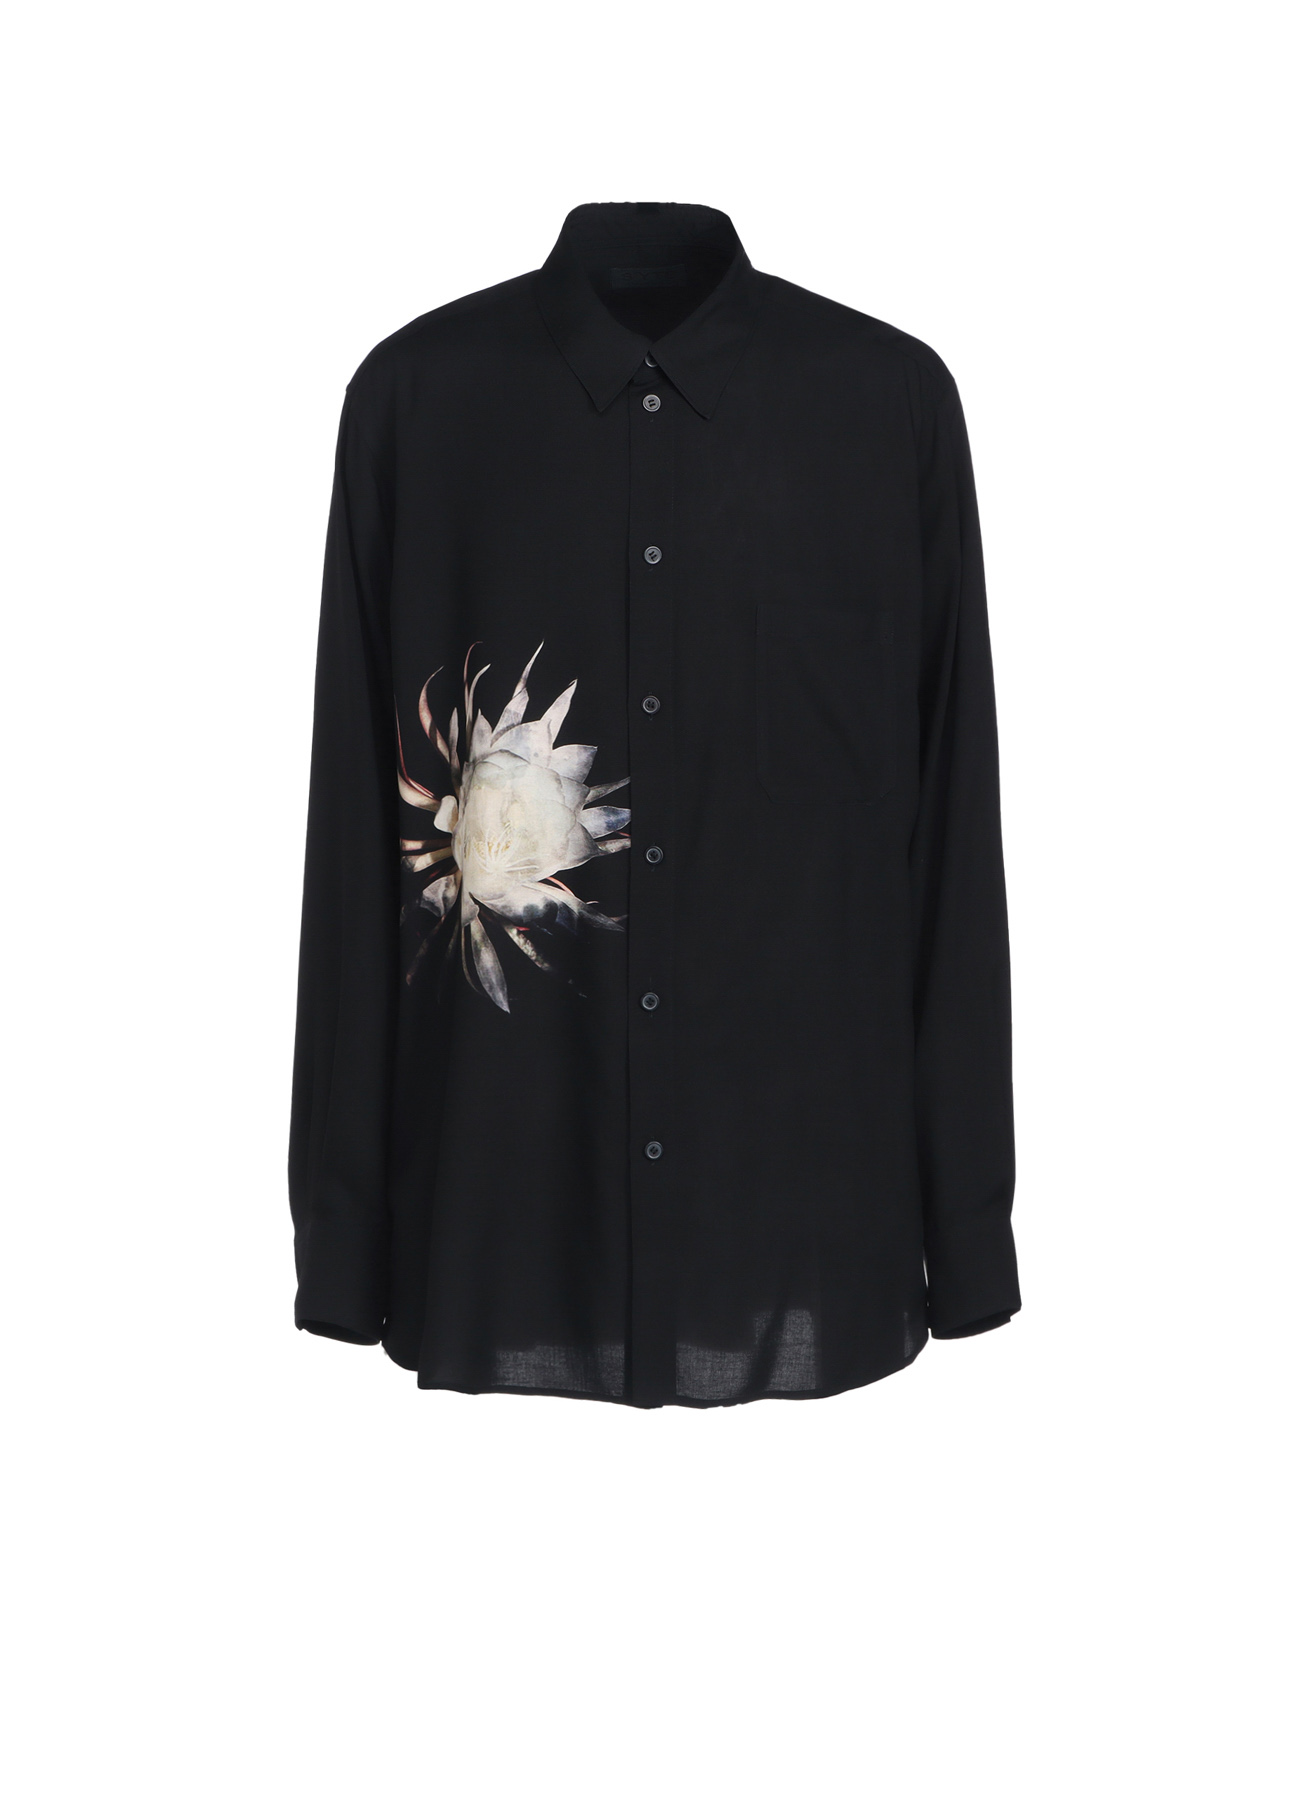 RAYON LOAN “QUEEN OF THE NIGHT“ PRINTED SHIRT